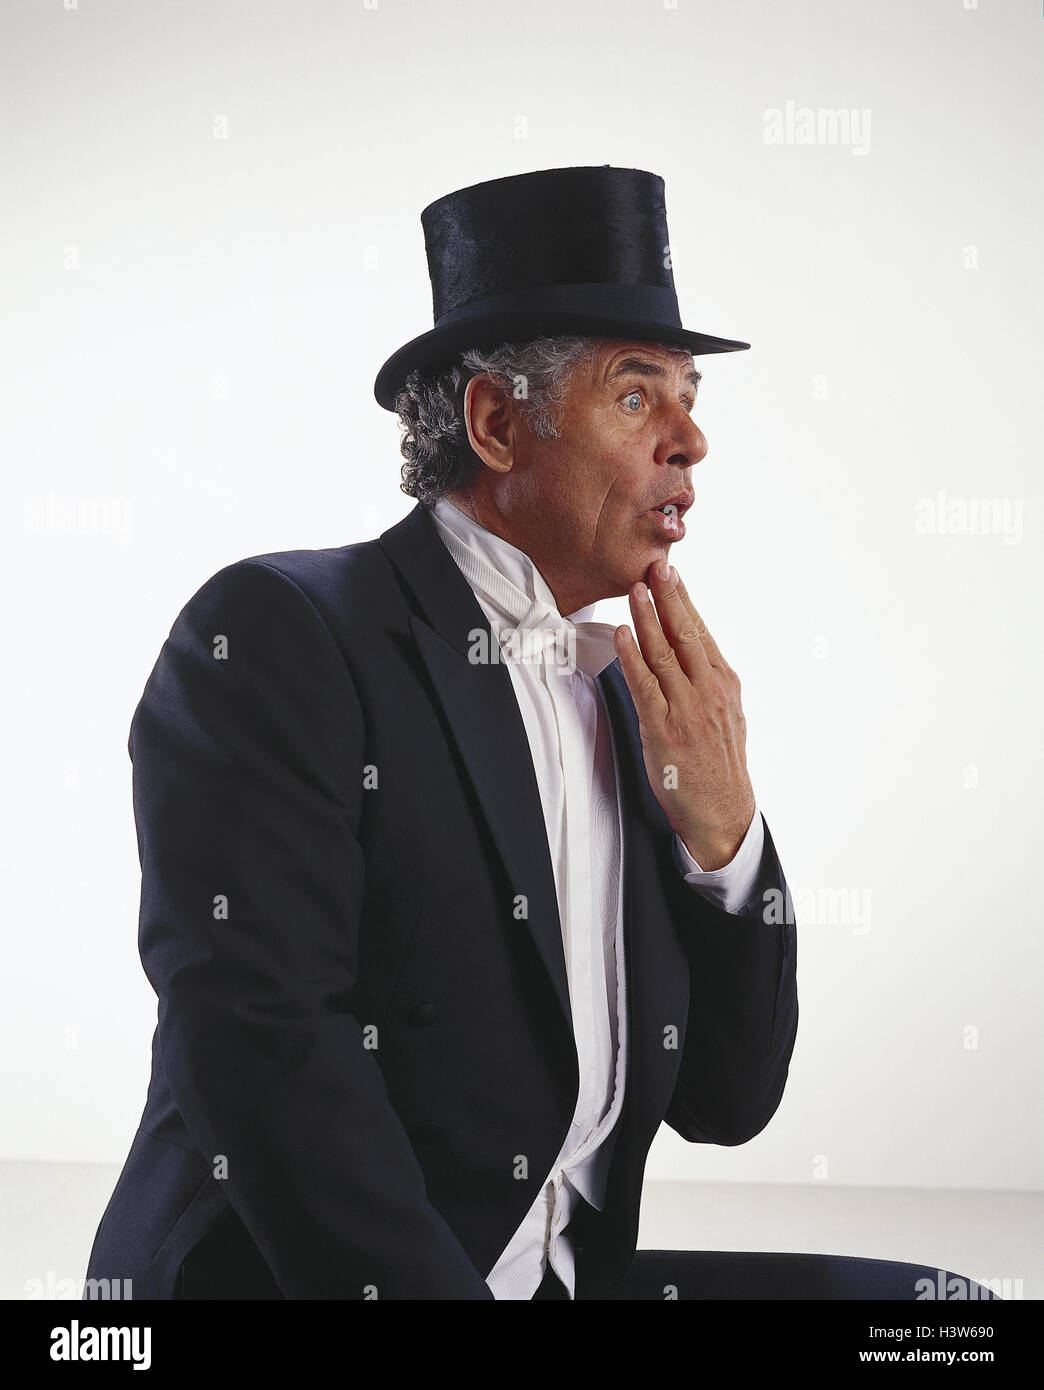 Man, tails, cylinder, amazes, gesture, half portrait, side view, senior, suit, headgear, top hat, elegantly, festively, facial play, surprises, there are astonished, taken aback, astonishment, bewilderment, surprise, preview, studio, cut outs, Stock Photo